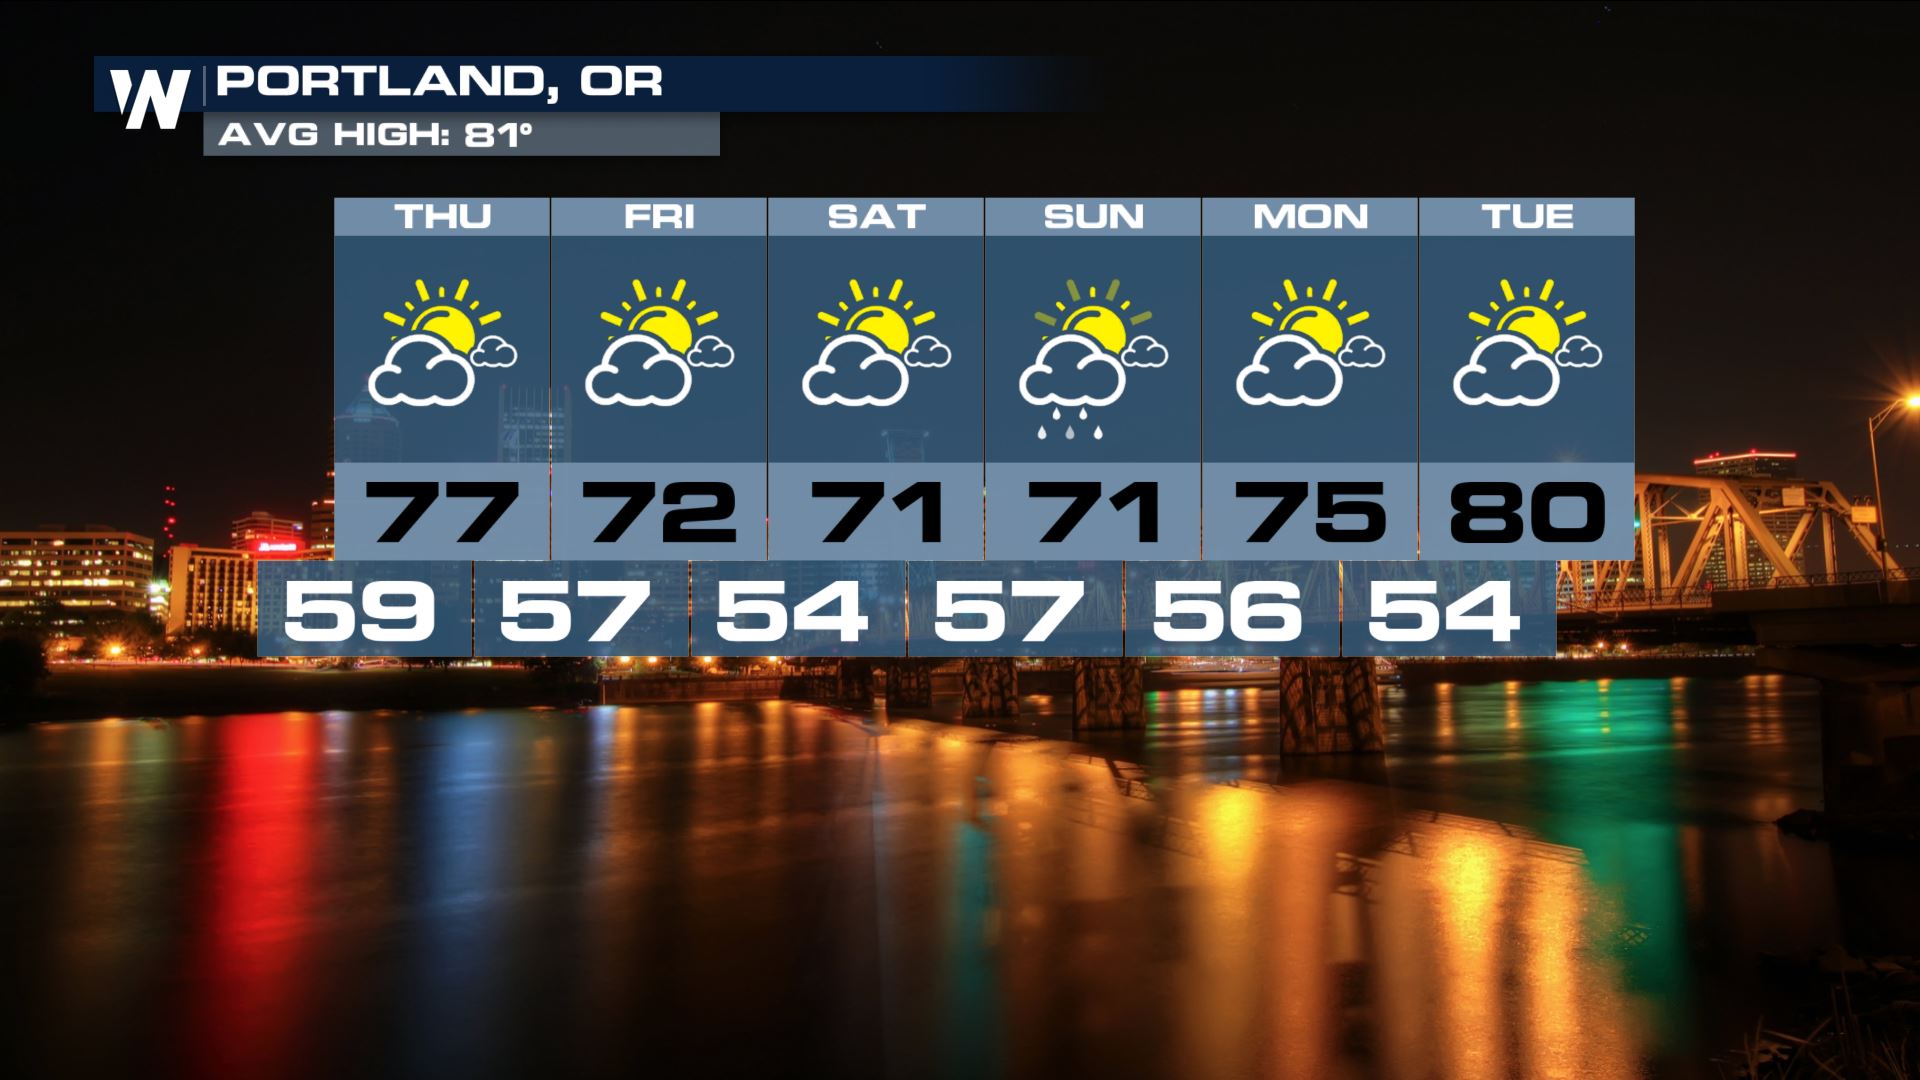 Hot Summer: Most 90° Days Observed in Portland